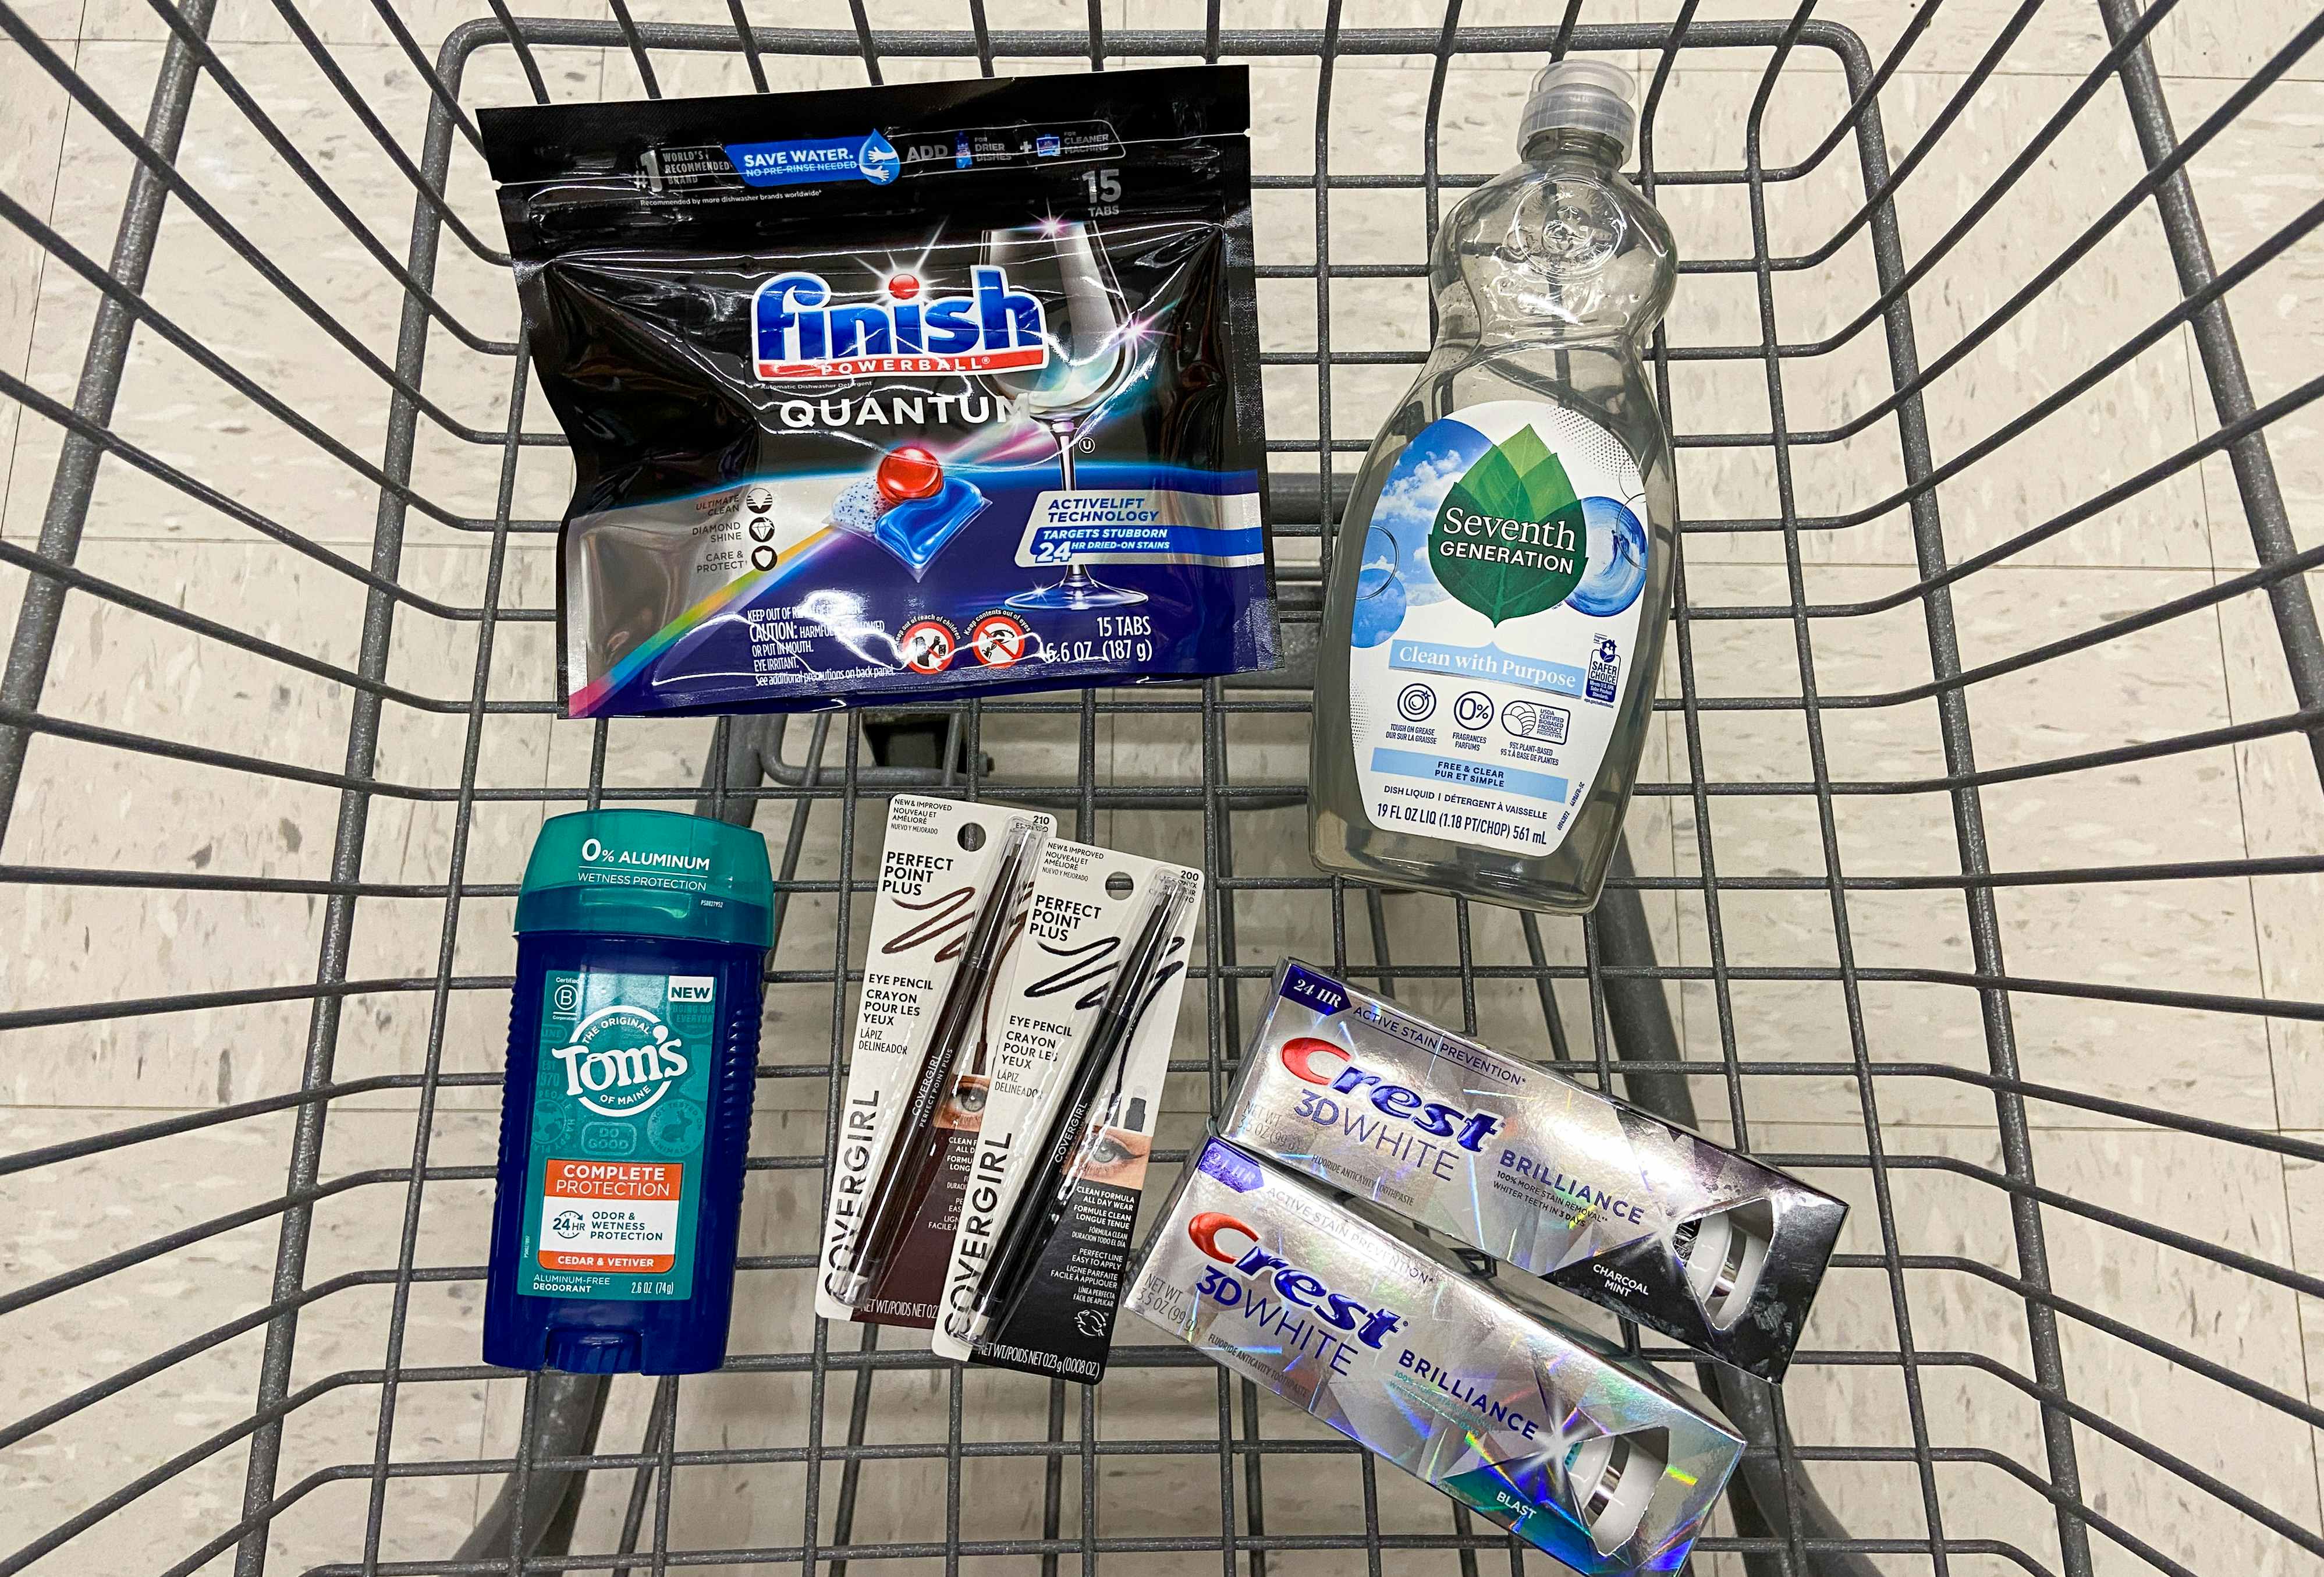 a walgreens shopping cart with Tom's of Maine deodorant, crest toothpaste, seventh generation dishwashing liquid, finish dishwashing tabs, and covergirl eyeliner